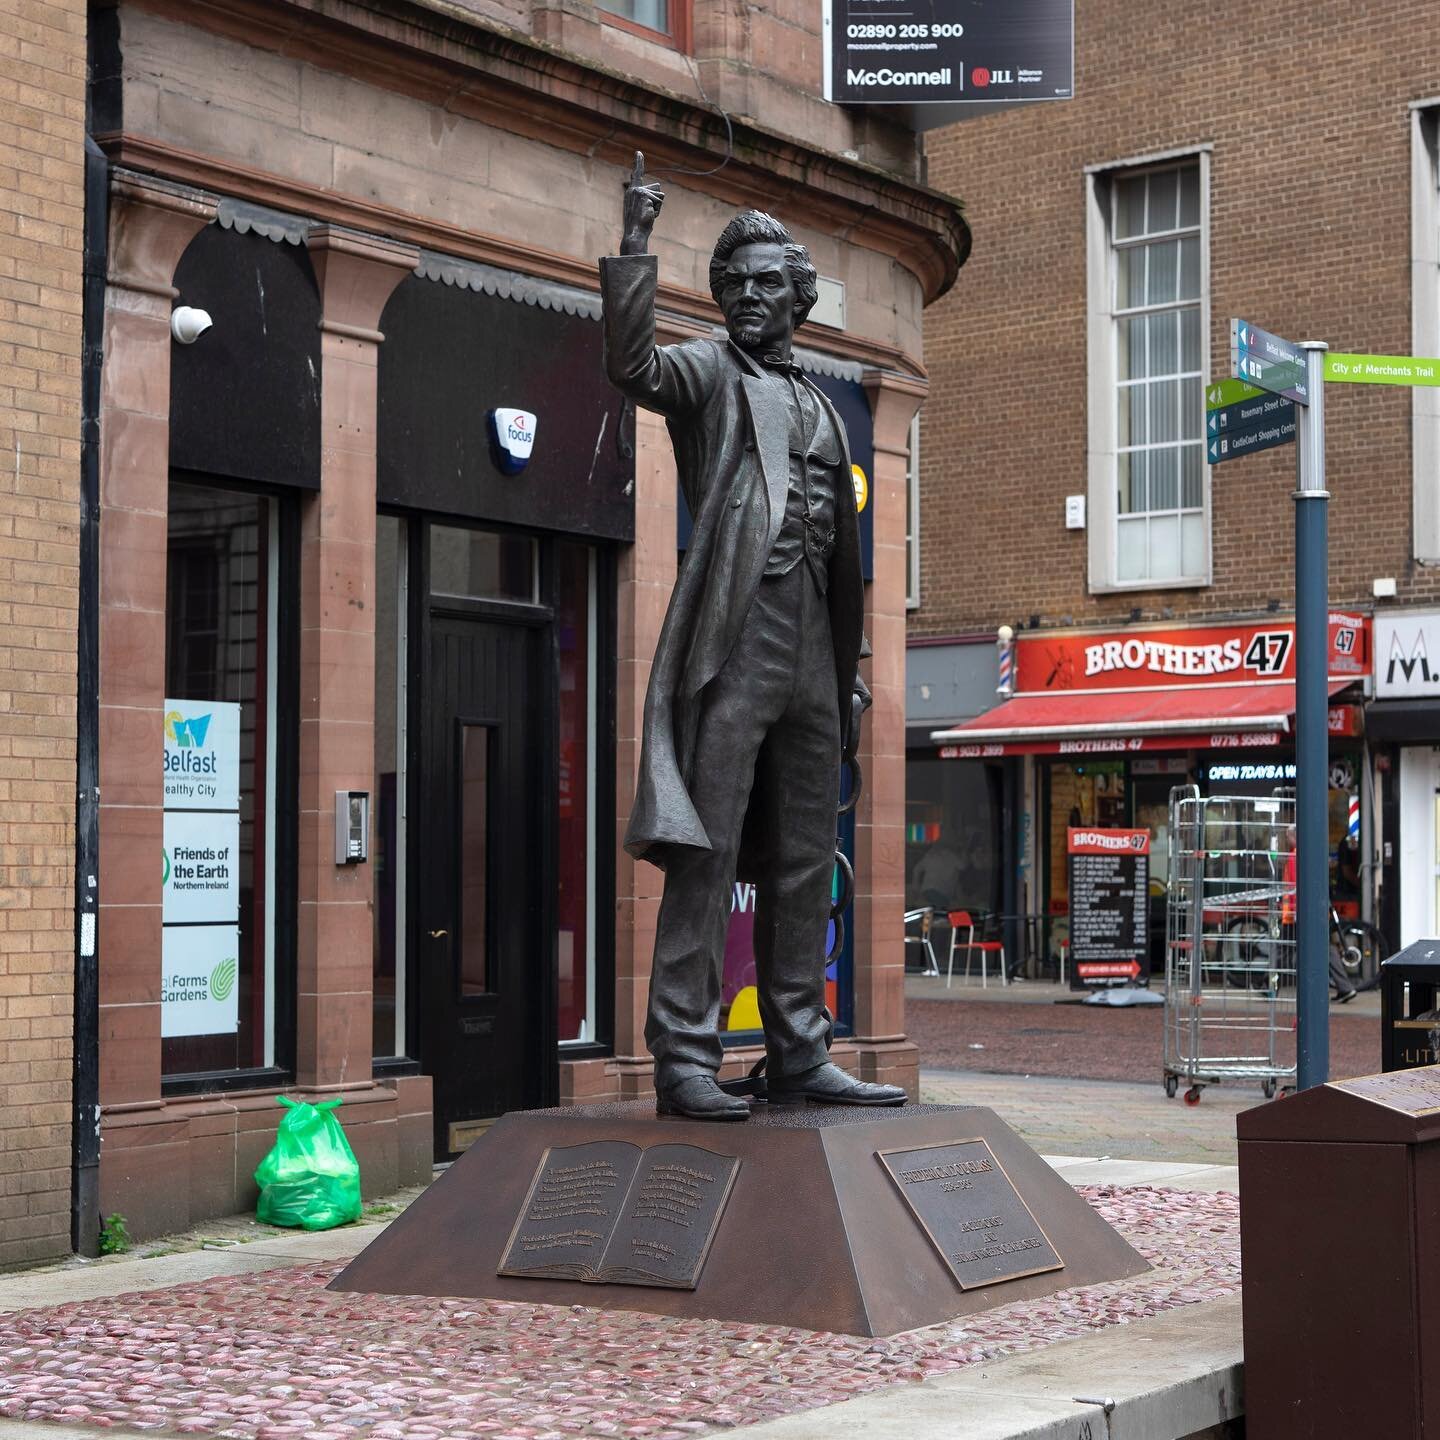 It was an honour to sculpt this statue of Frederick Douglass at the start of the year. It is situated in Belfast on Rosemary street close to where he delivered one of his speeches in 1845